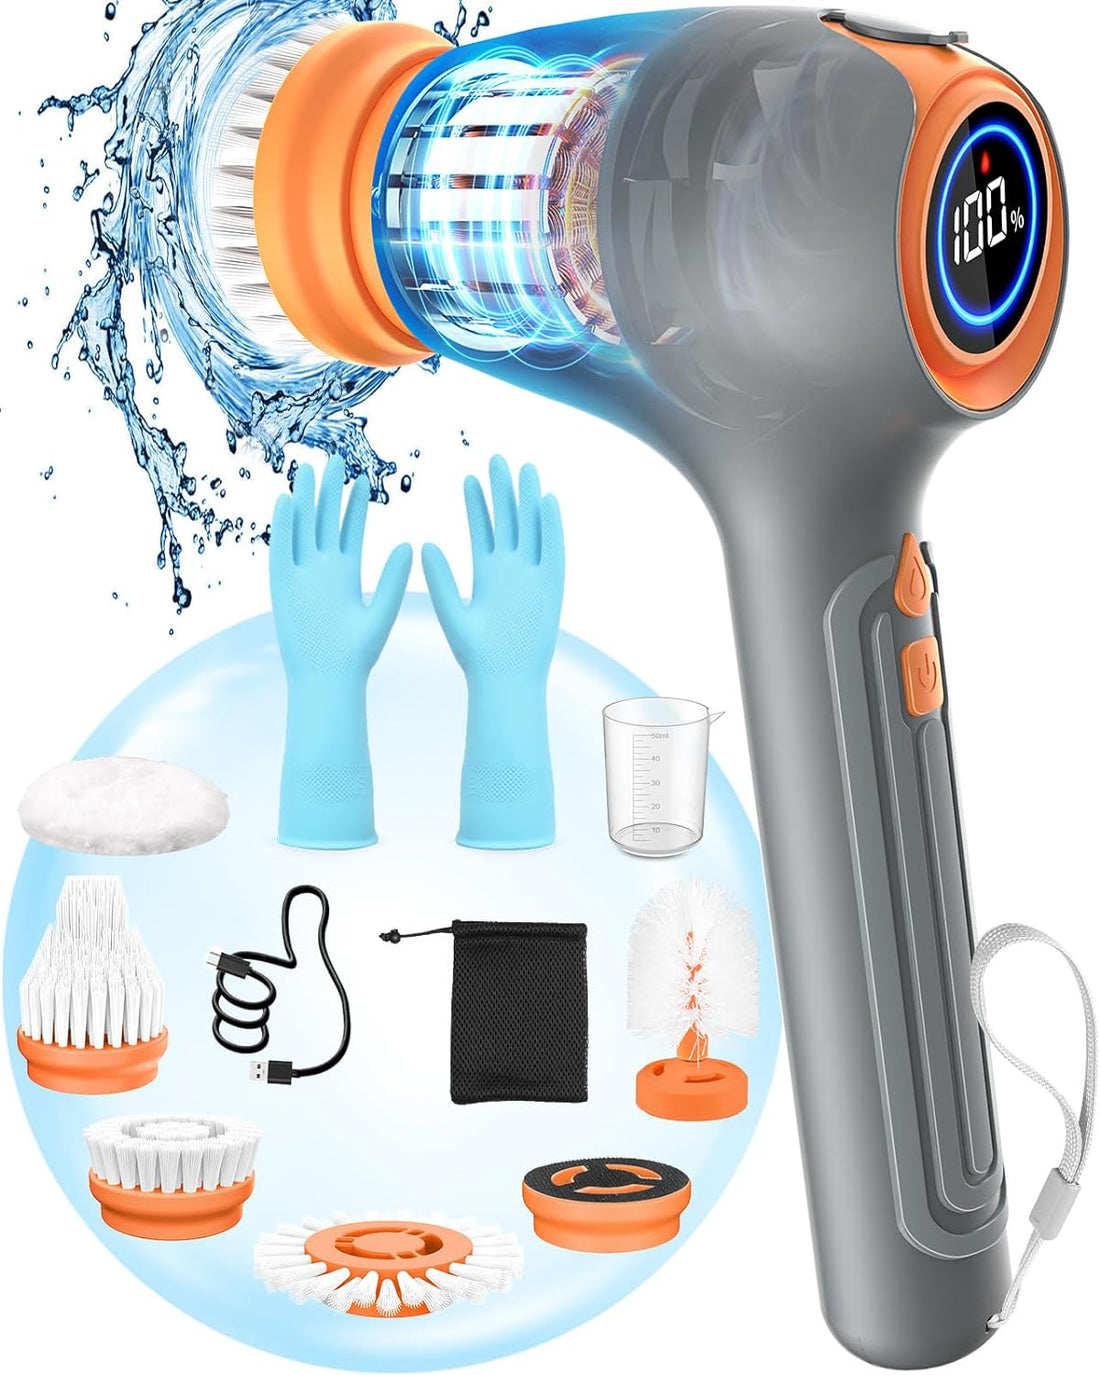 Rechargeable Cordless Electric Spin Scrubber with 5 Cleaning Brush Heads